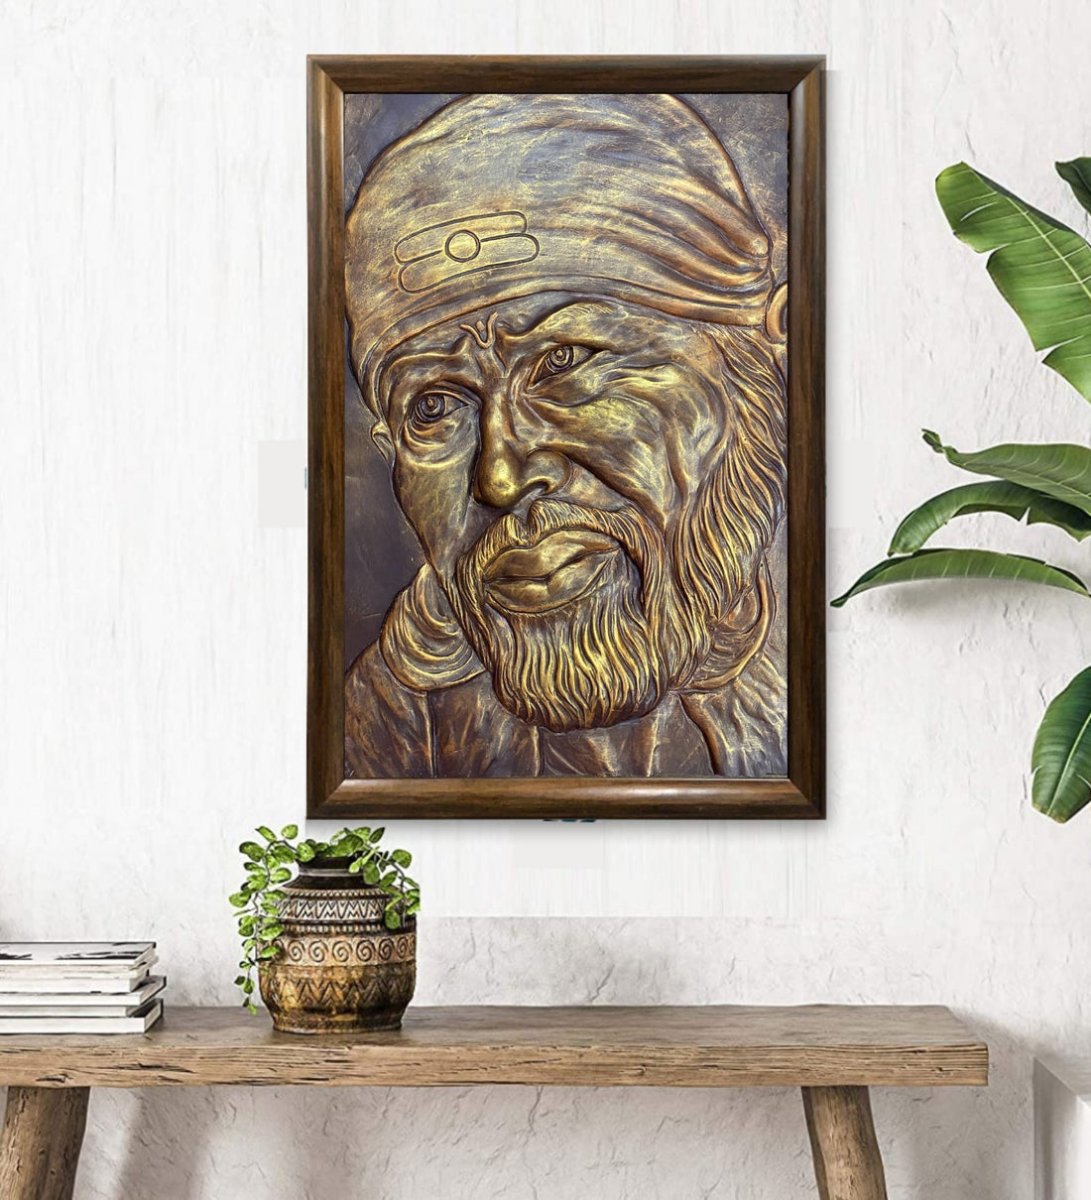 Sai Baba 3D Wall Hanging (36 x 24 Inches)